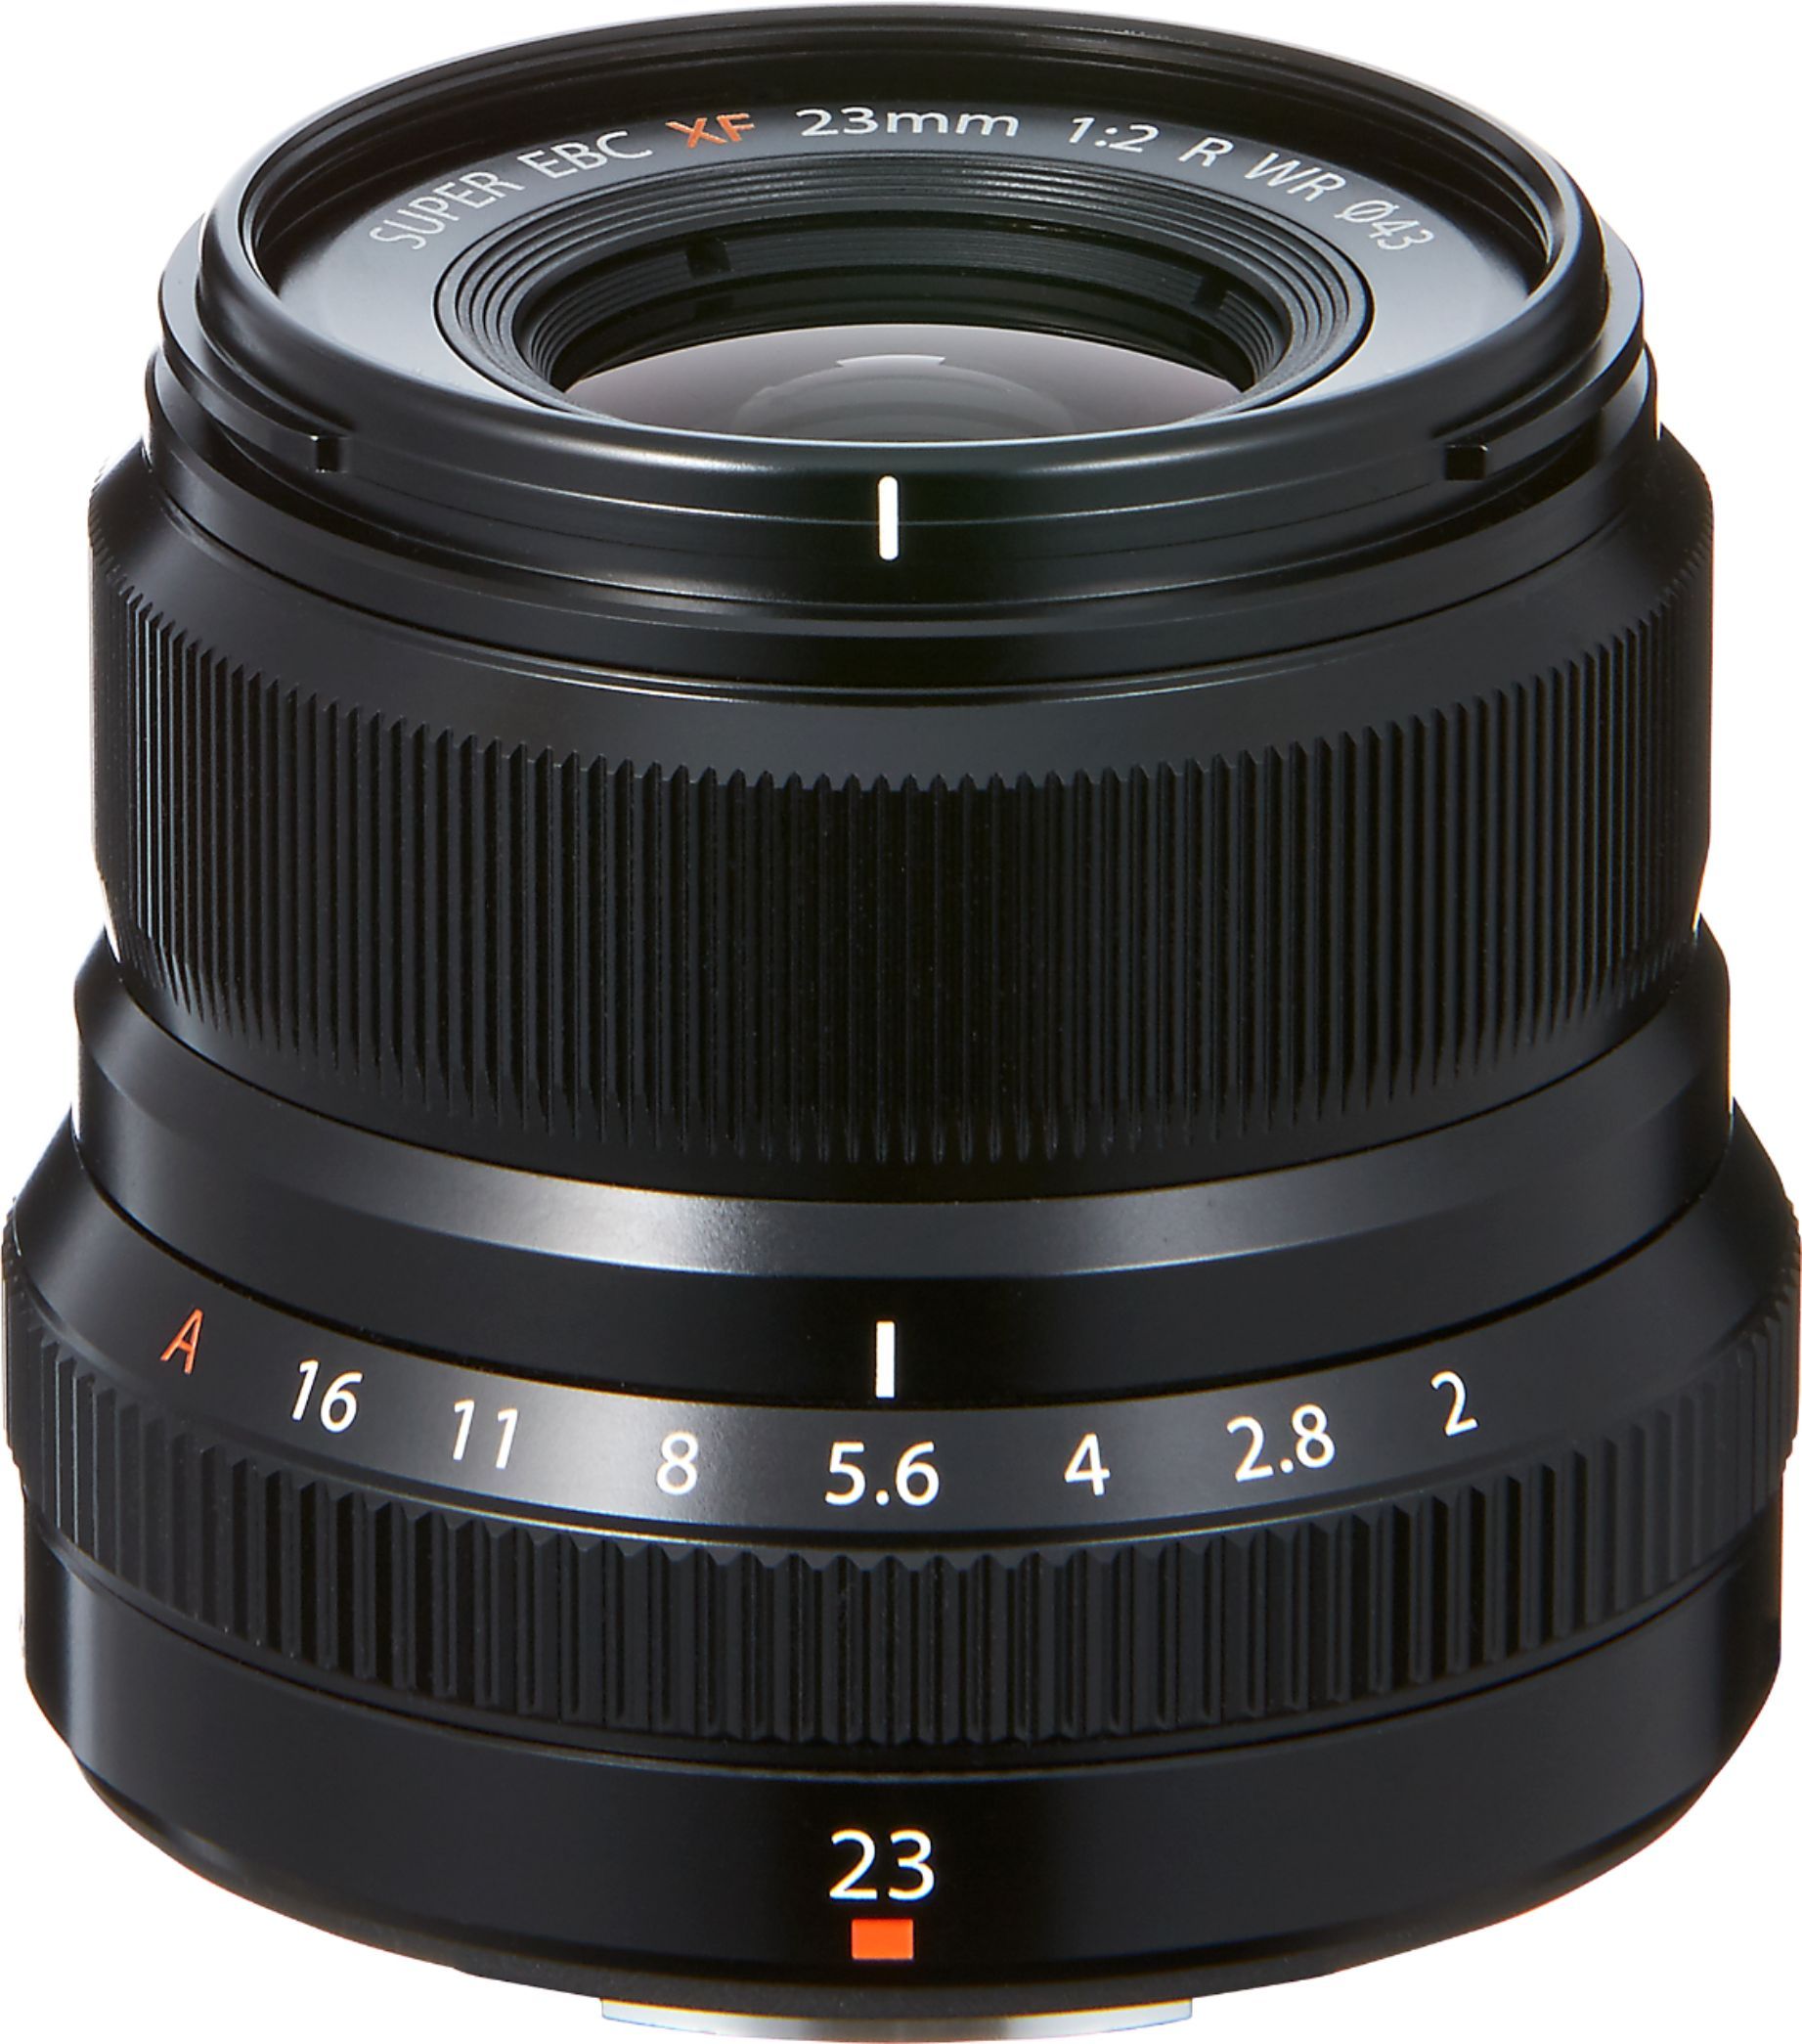 XF23mmF2 R WR Wide-angle Lens for Fujifilm X-Mount System Cameras Black 16523169 - Best Buy | Best Buy U.S.